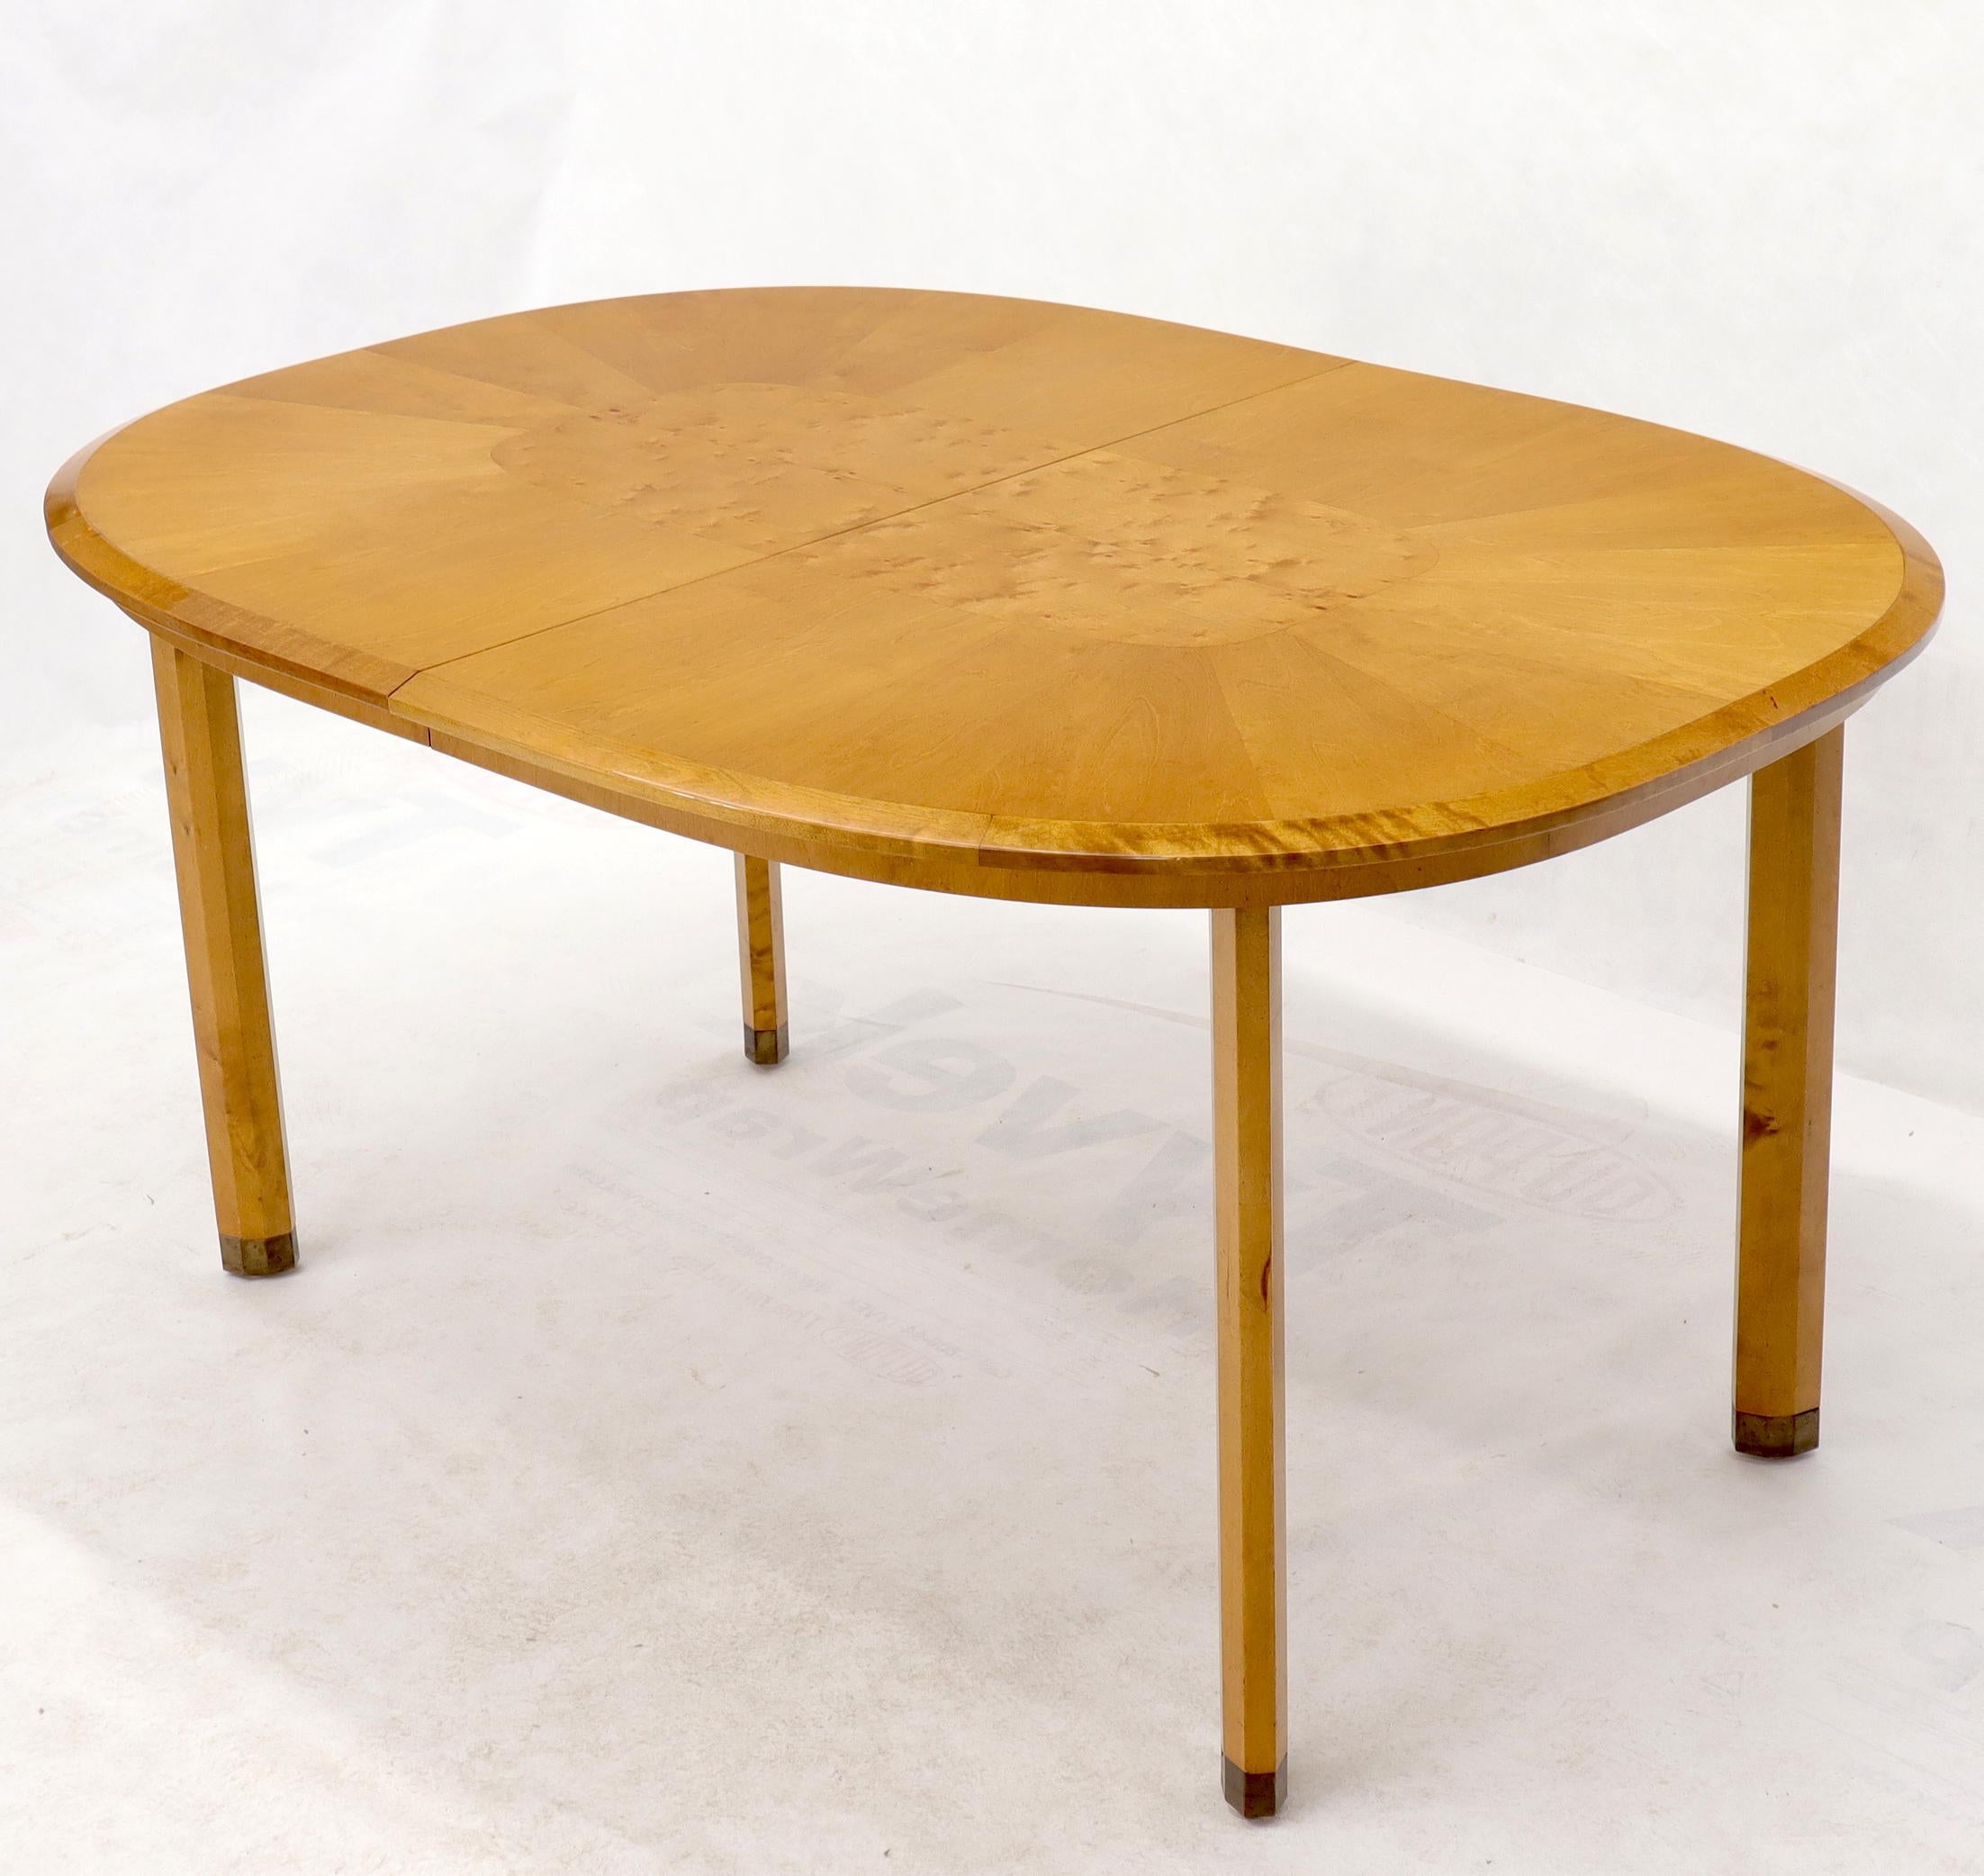 20th Century Blond Swedish Birch with Burl Oval Racetrack Dining Table Spece